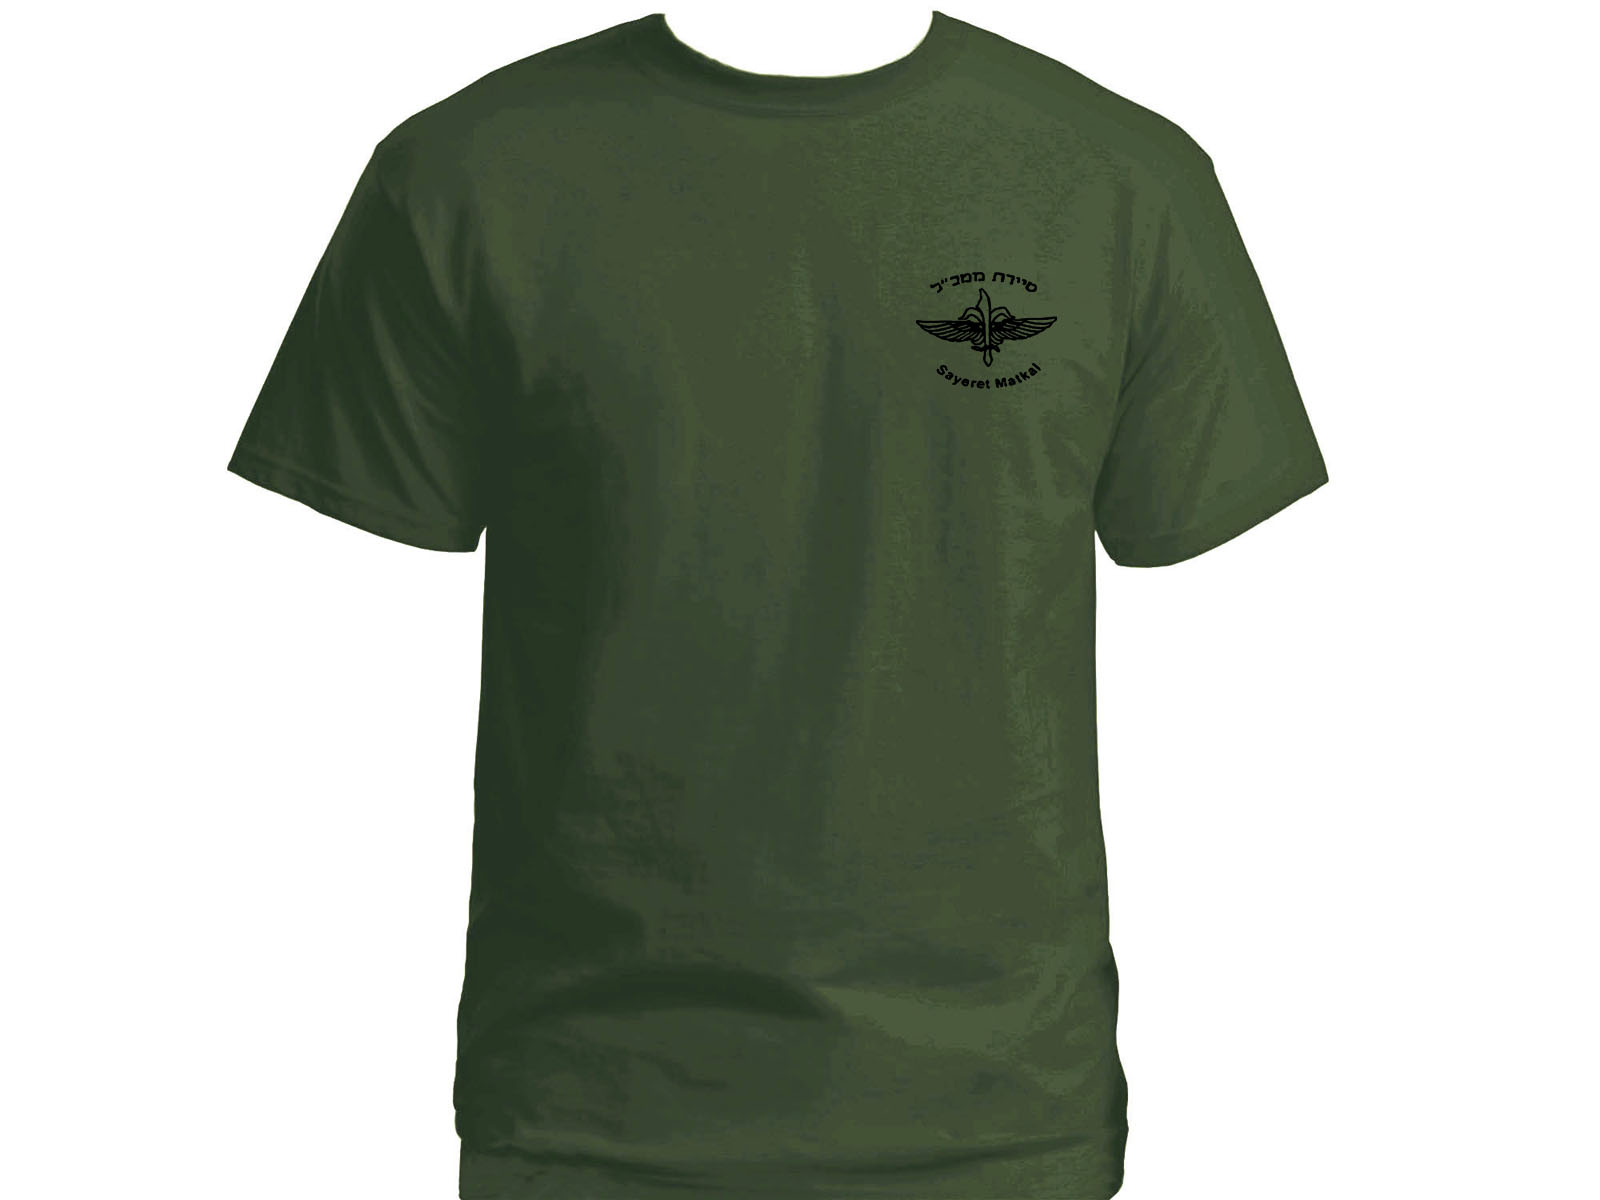 Israel special forces Sayeret matkal army green t-shirt 2